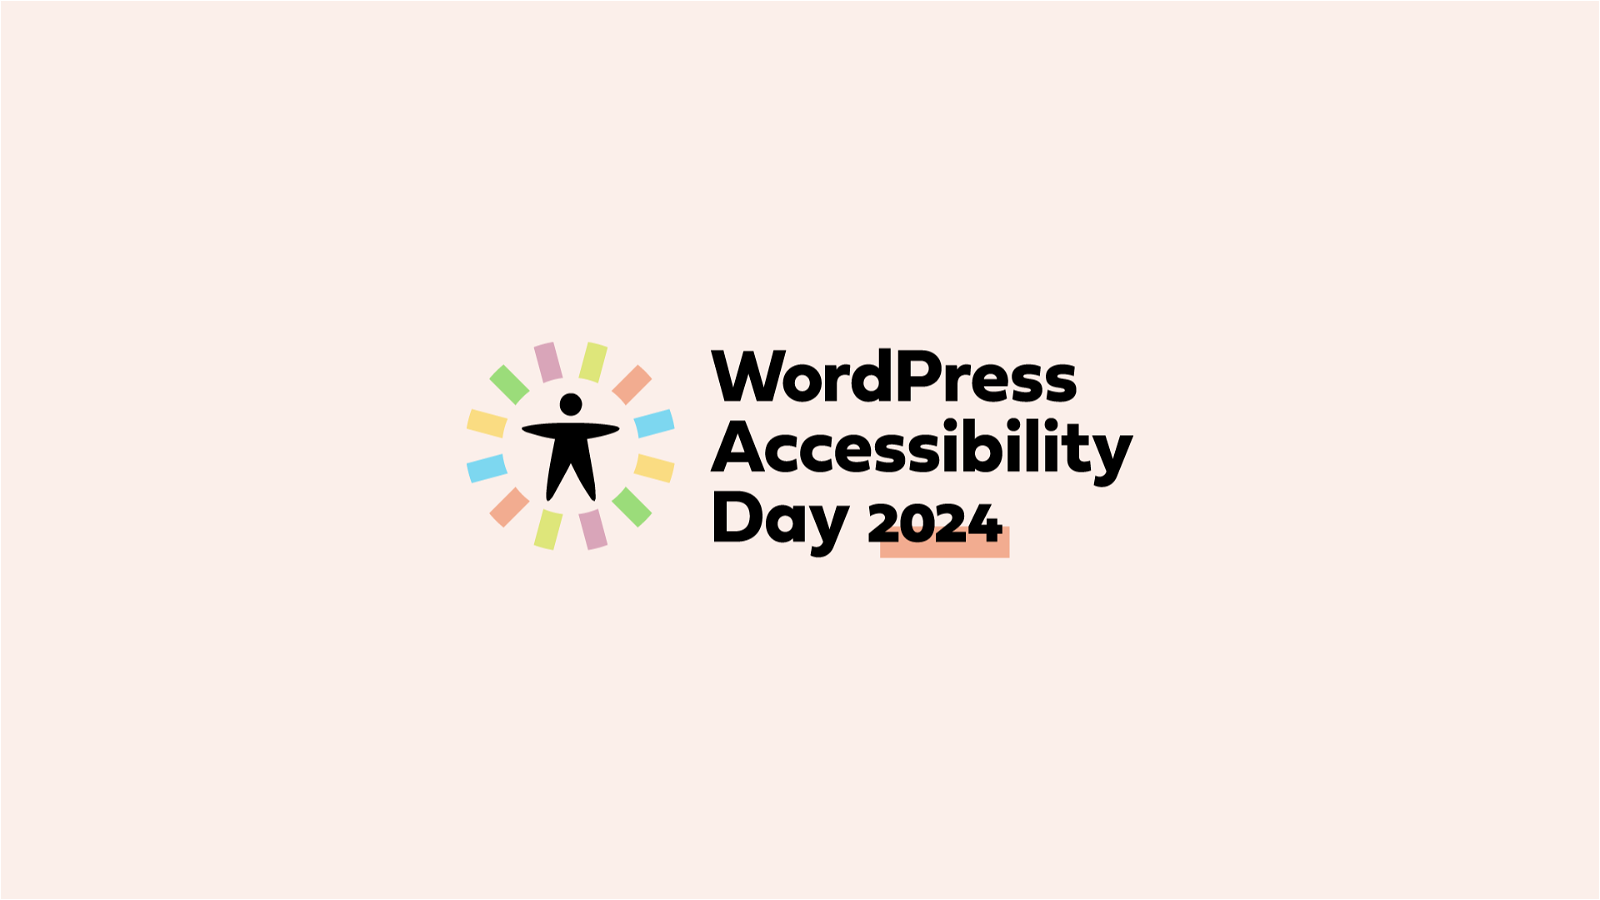 WordPress Accessibility Day 2024